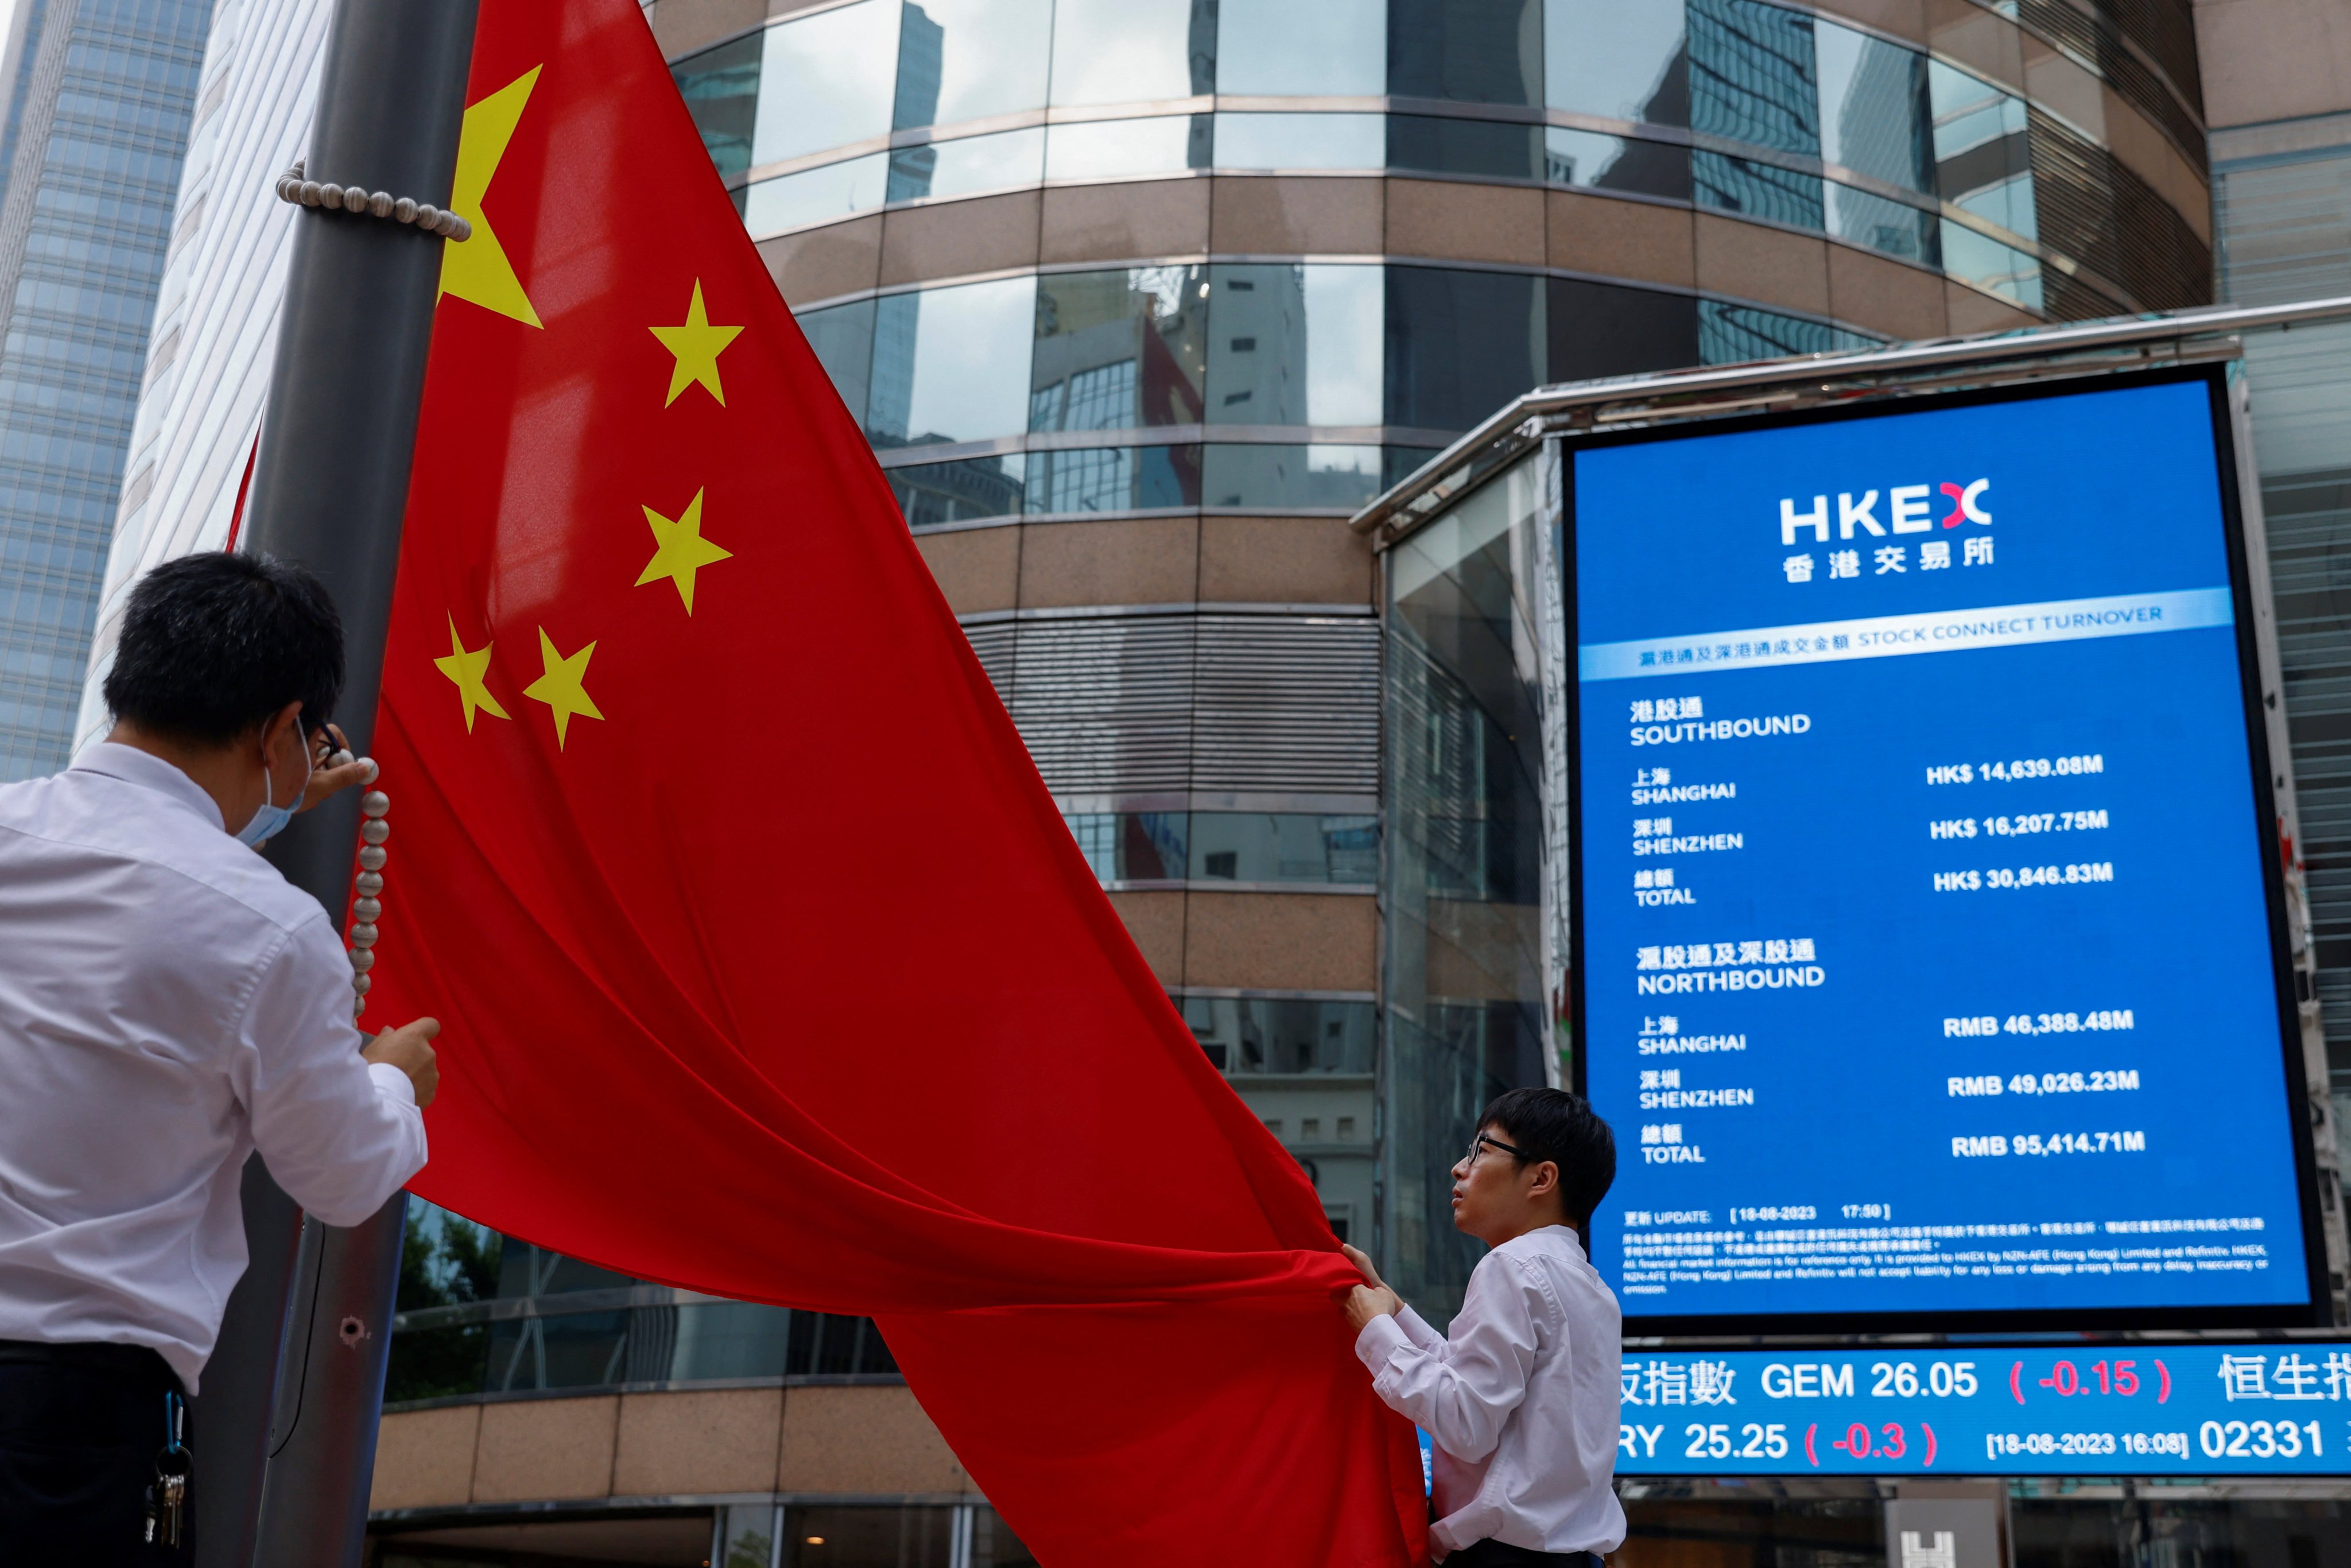 The new additions will increase the number of constituents to 82 from 80, says index compiler Hang Seng Indexes. Photo: Reuters